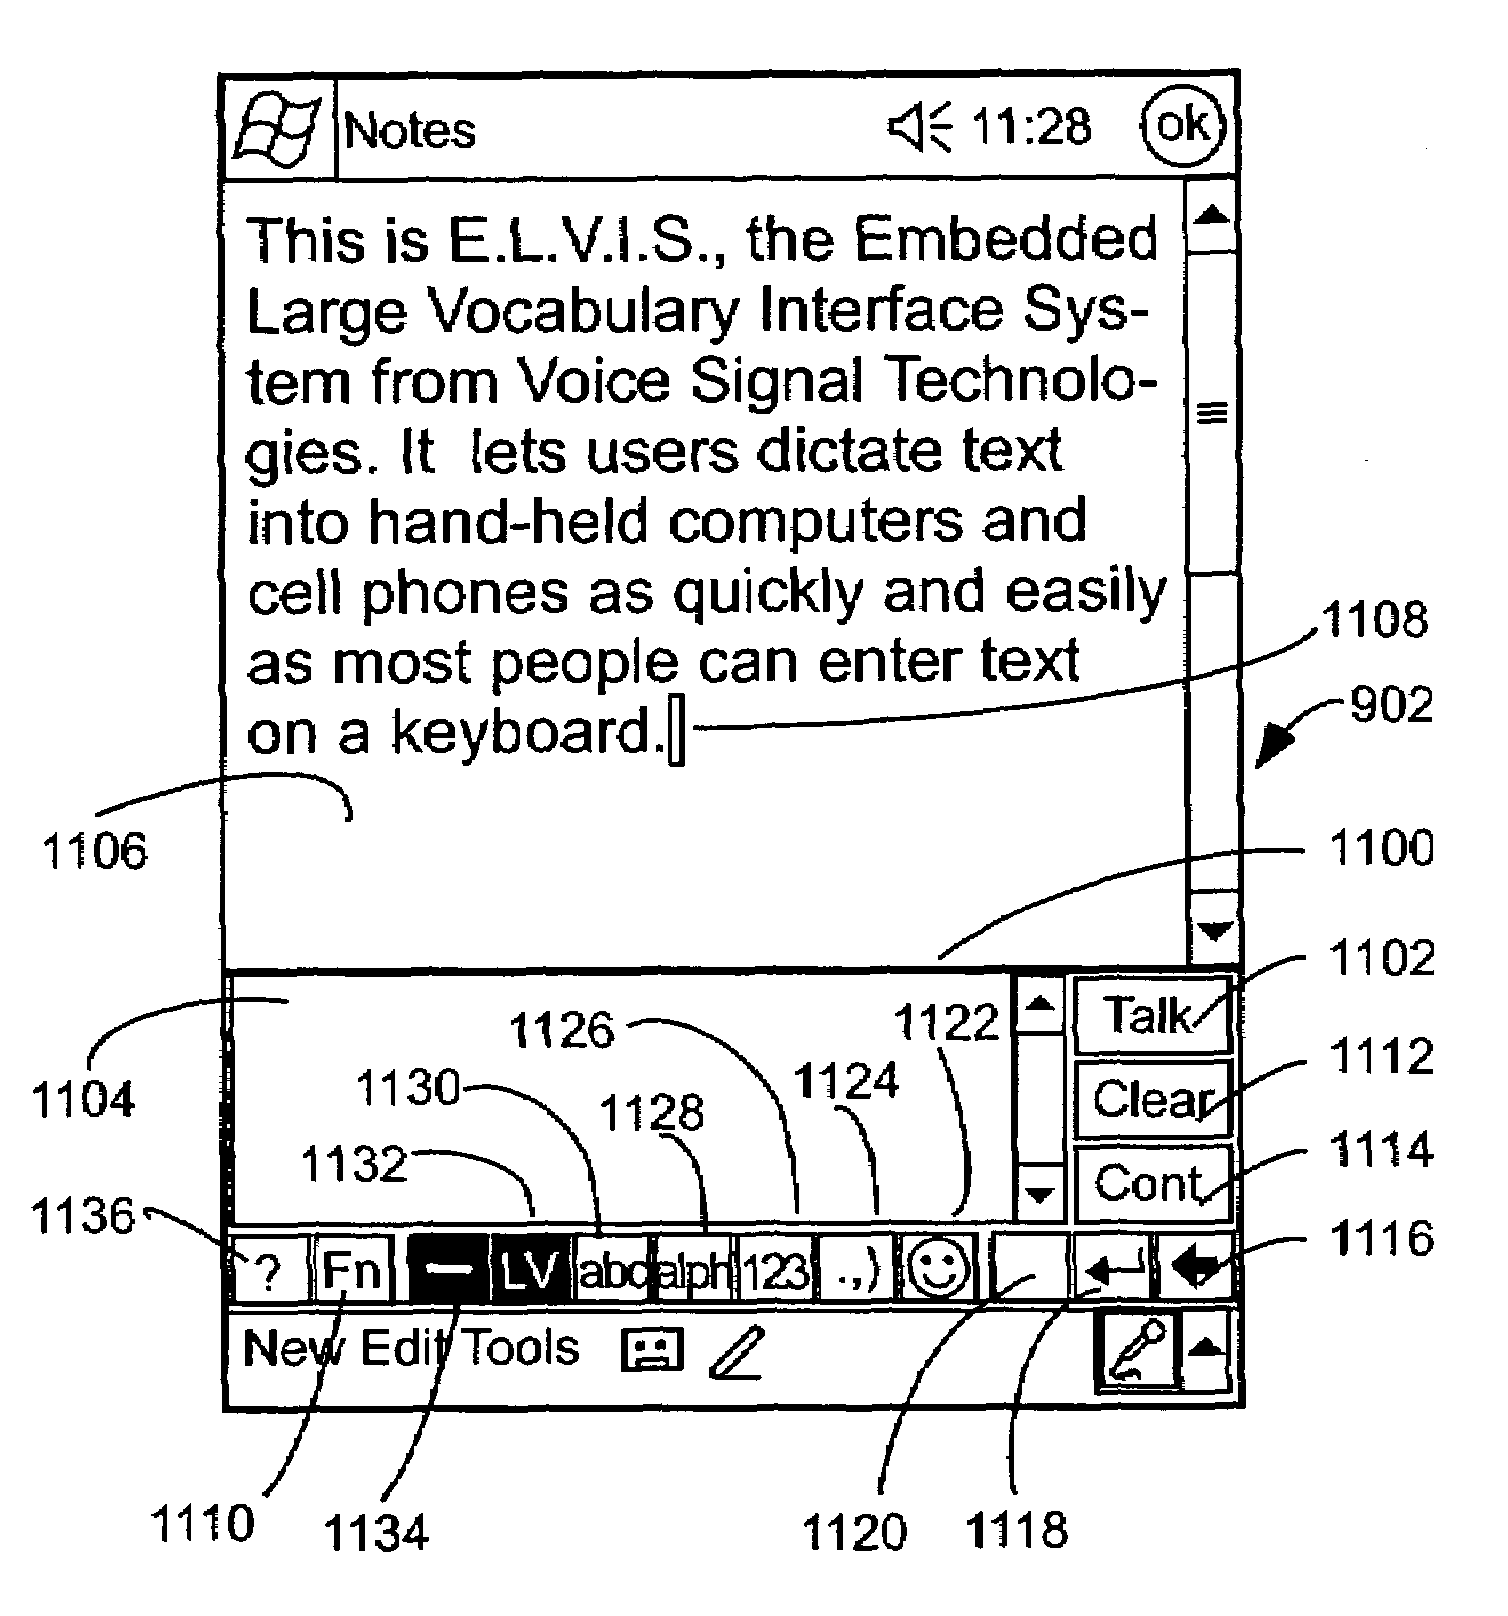 Speech recognition using ambiguous or phone key spelling and/or filtering